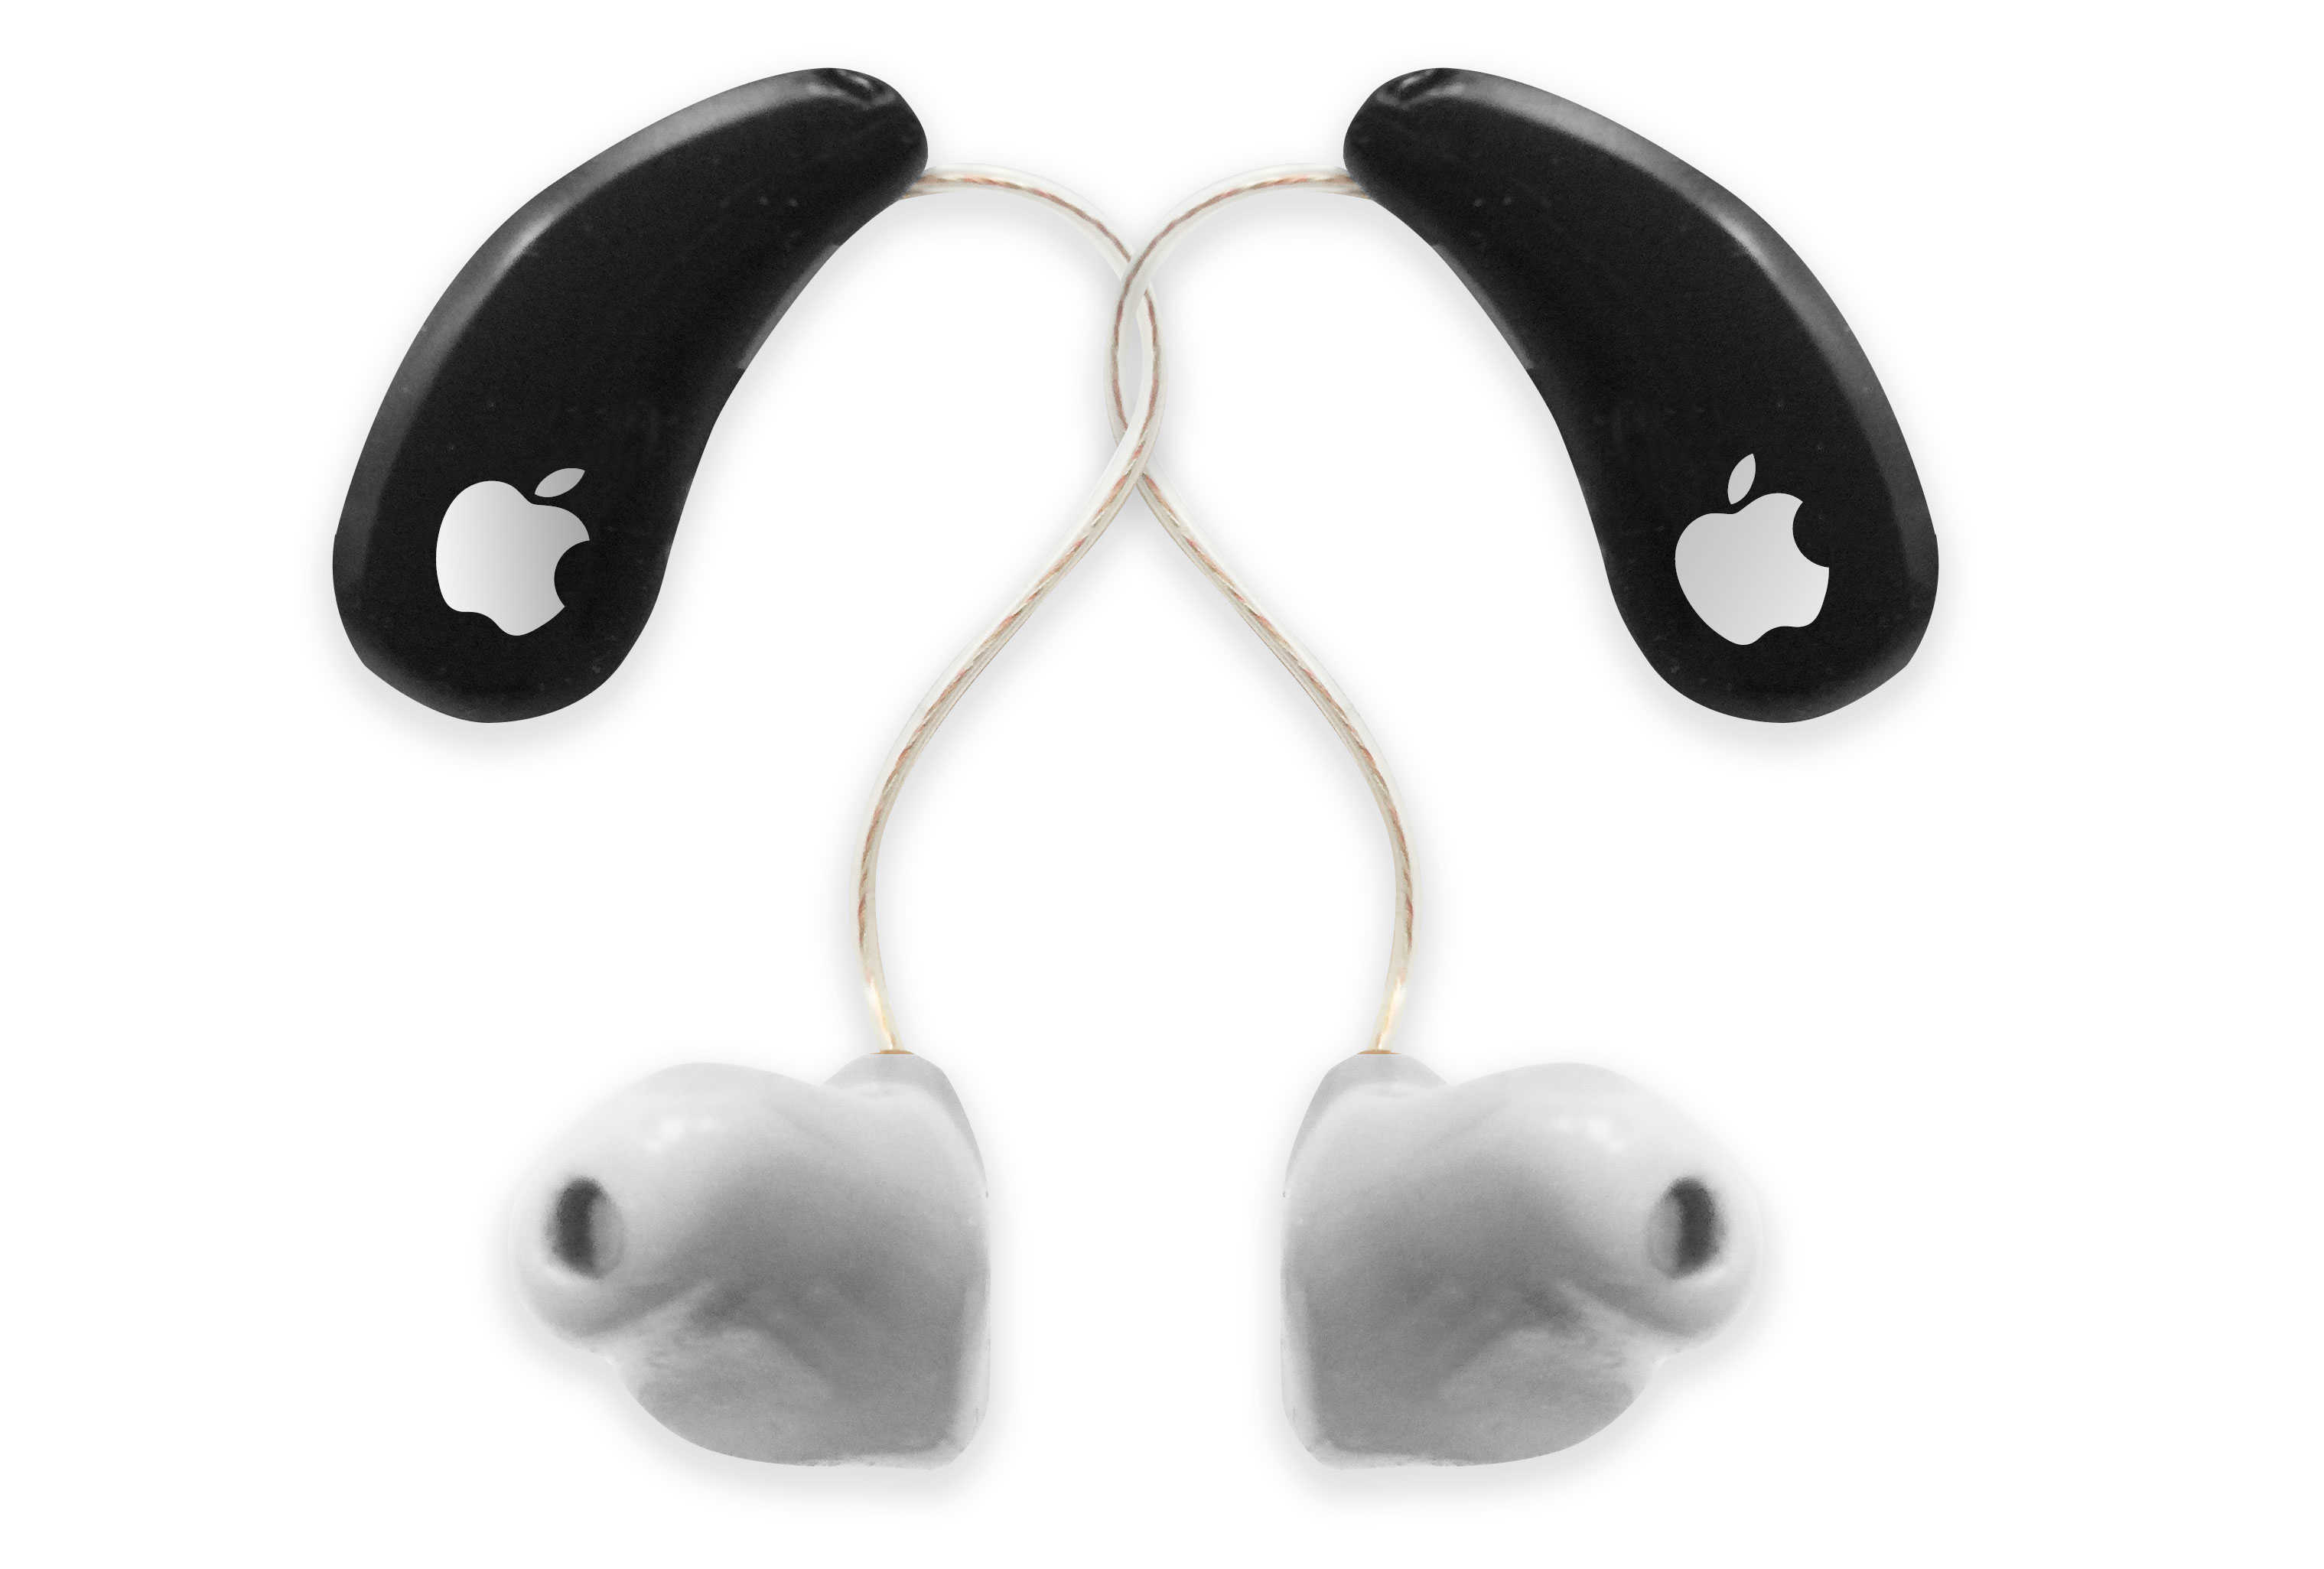 OK, I admit, these are just regular hearing aids with an Apple logo stuck on them. I’m sure Jonathan Ive and his team would come up with something way better.